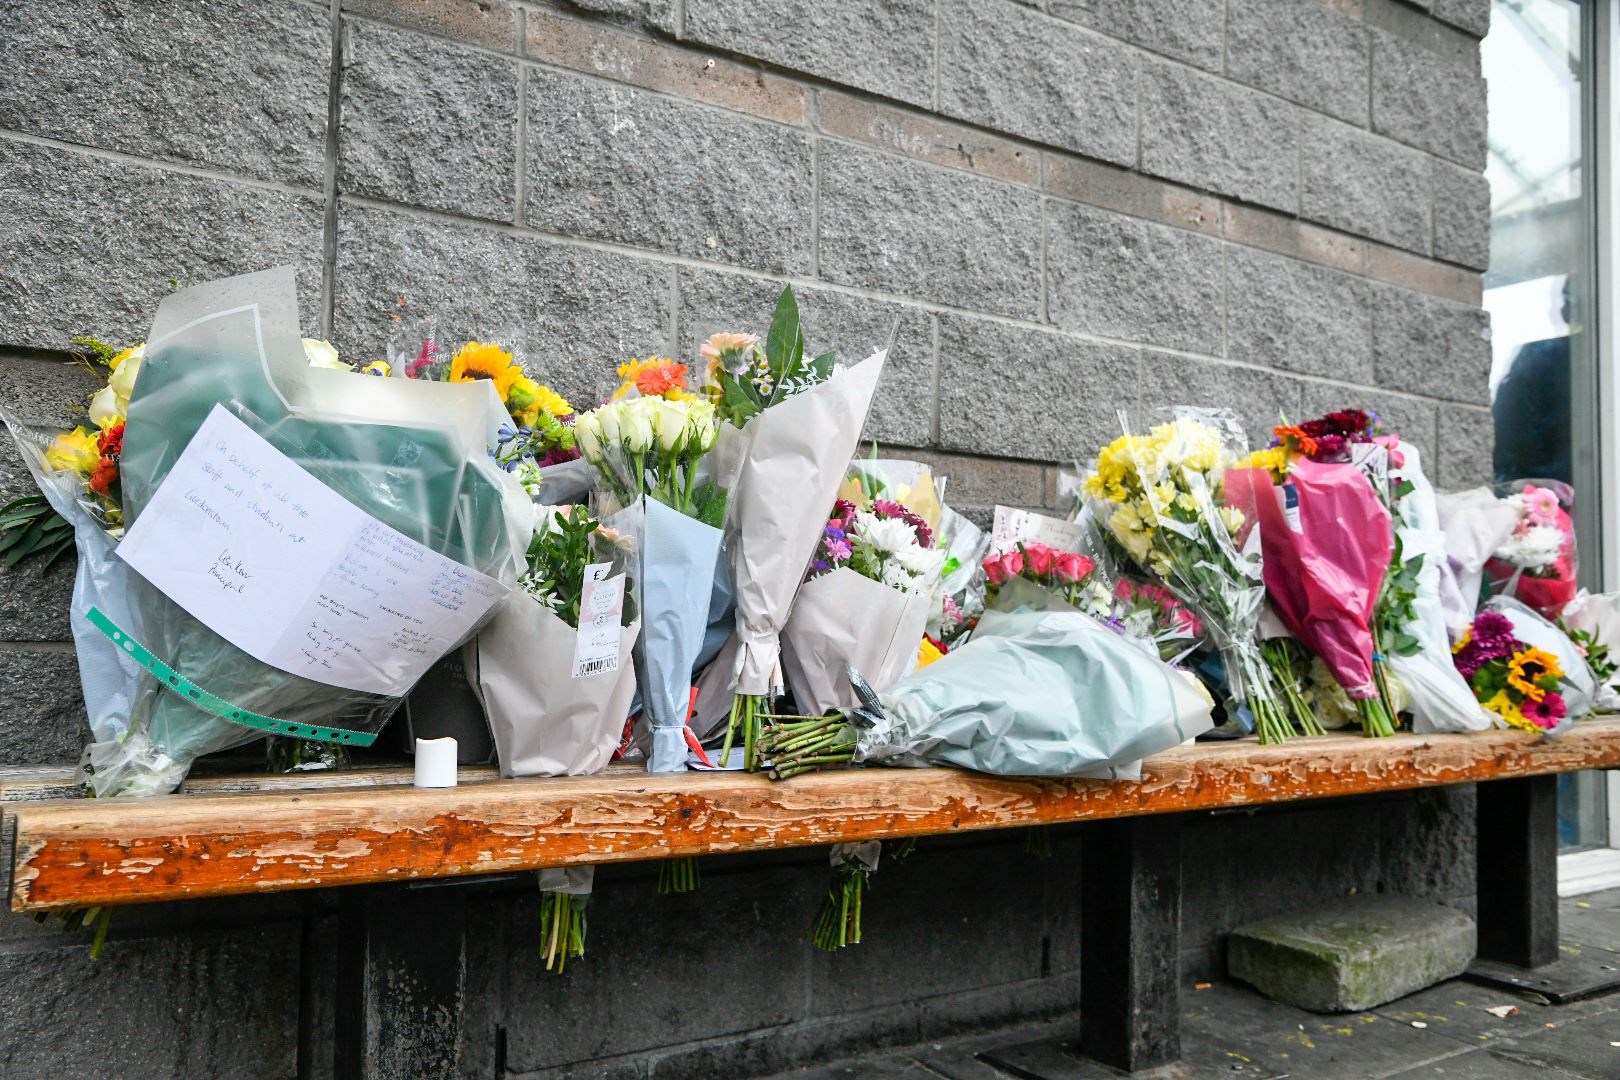 Tributes have been left on a bench in memory of Elgin bus driver Keith Rollinson. Picture: Beth Taylor